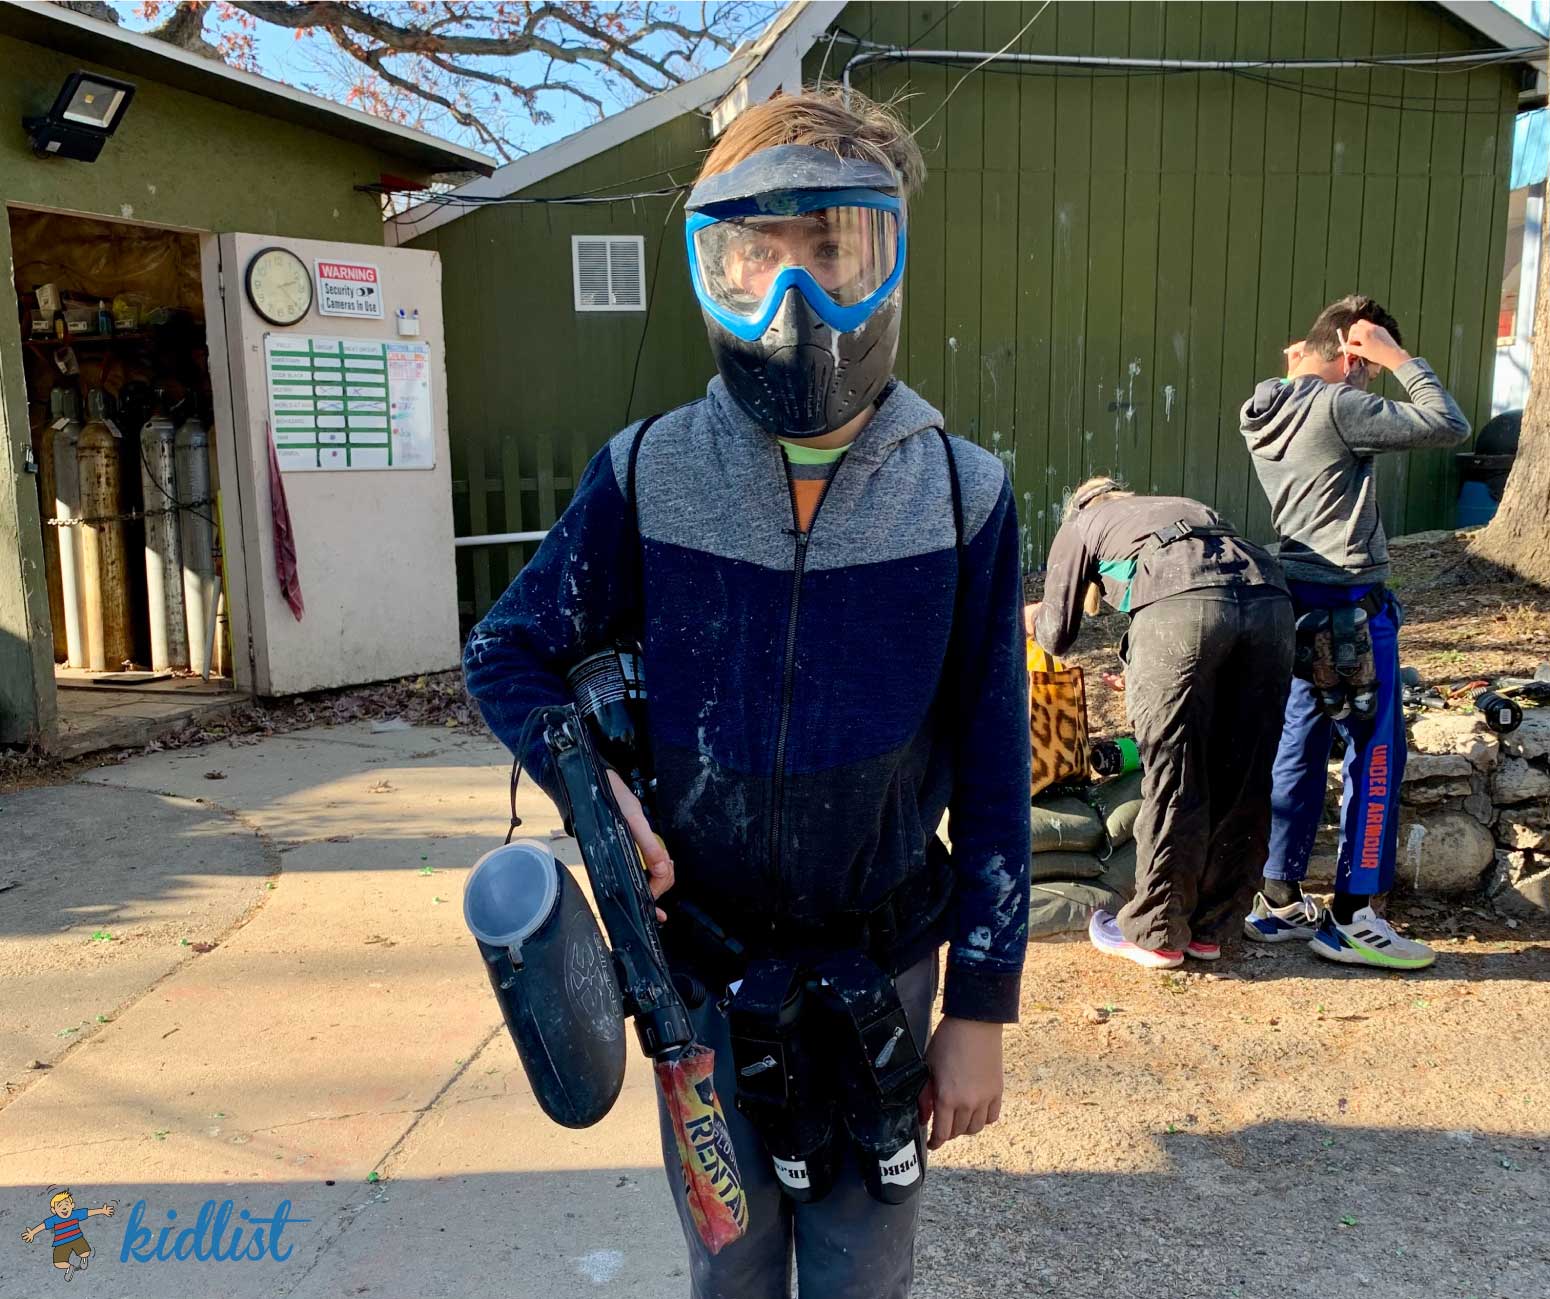 A boy all geared up to play paintball near Chicago